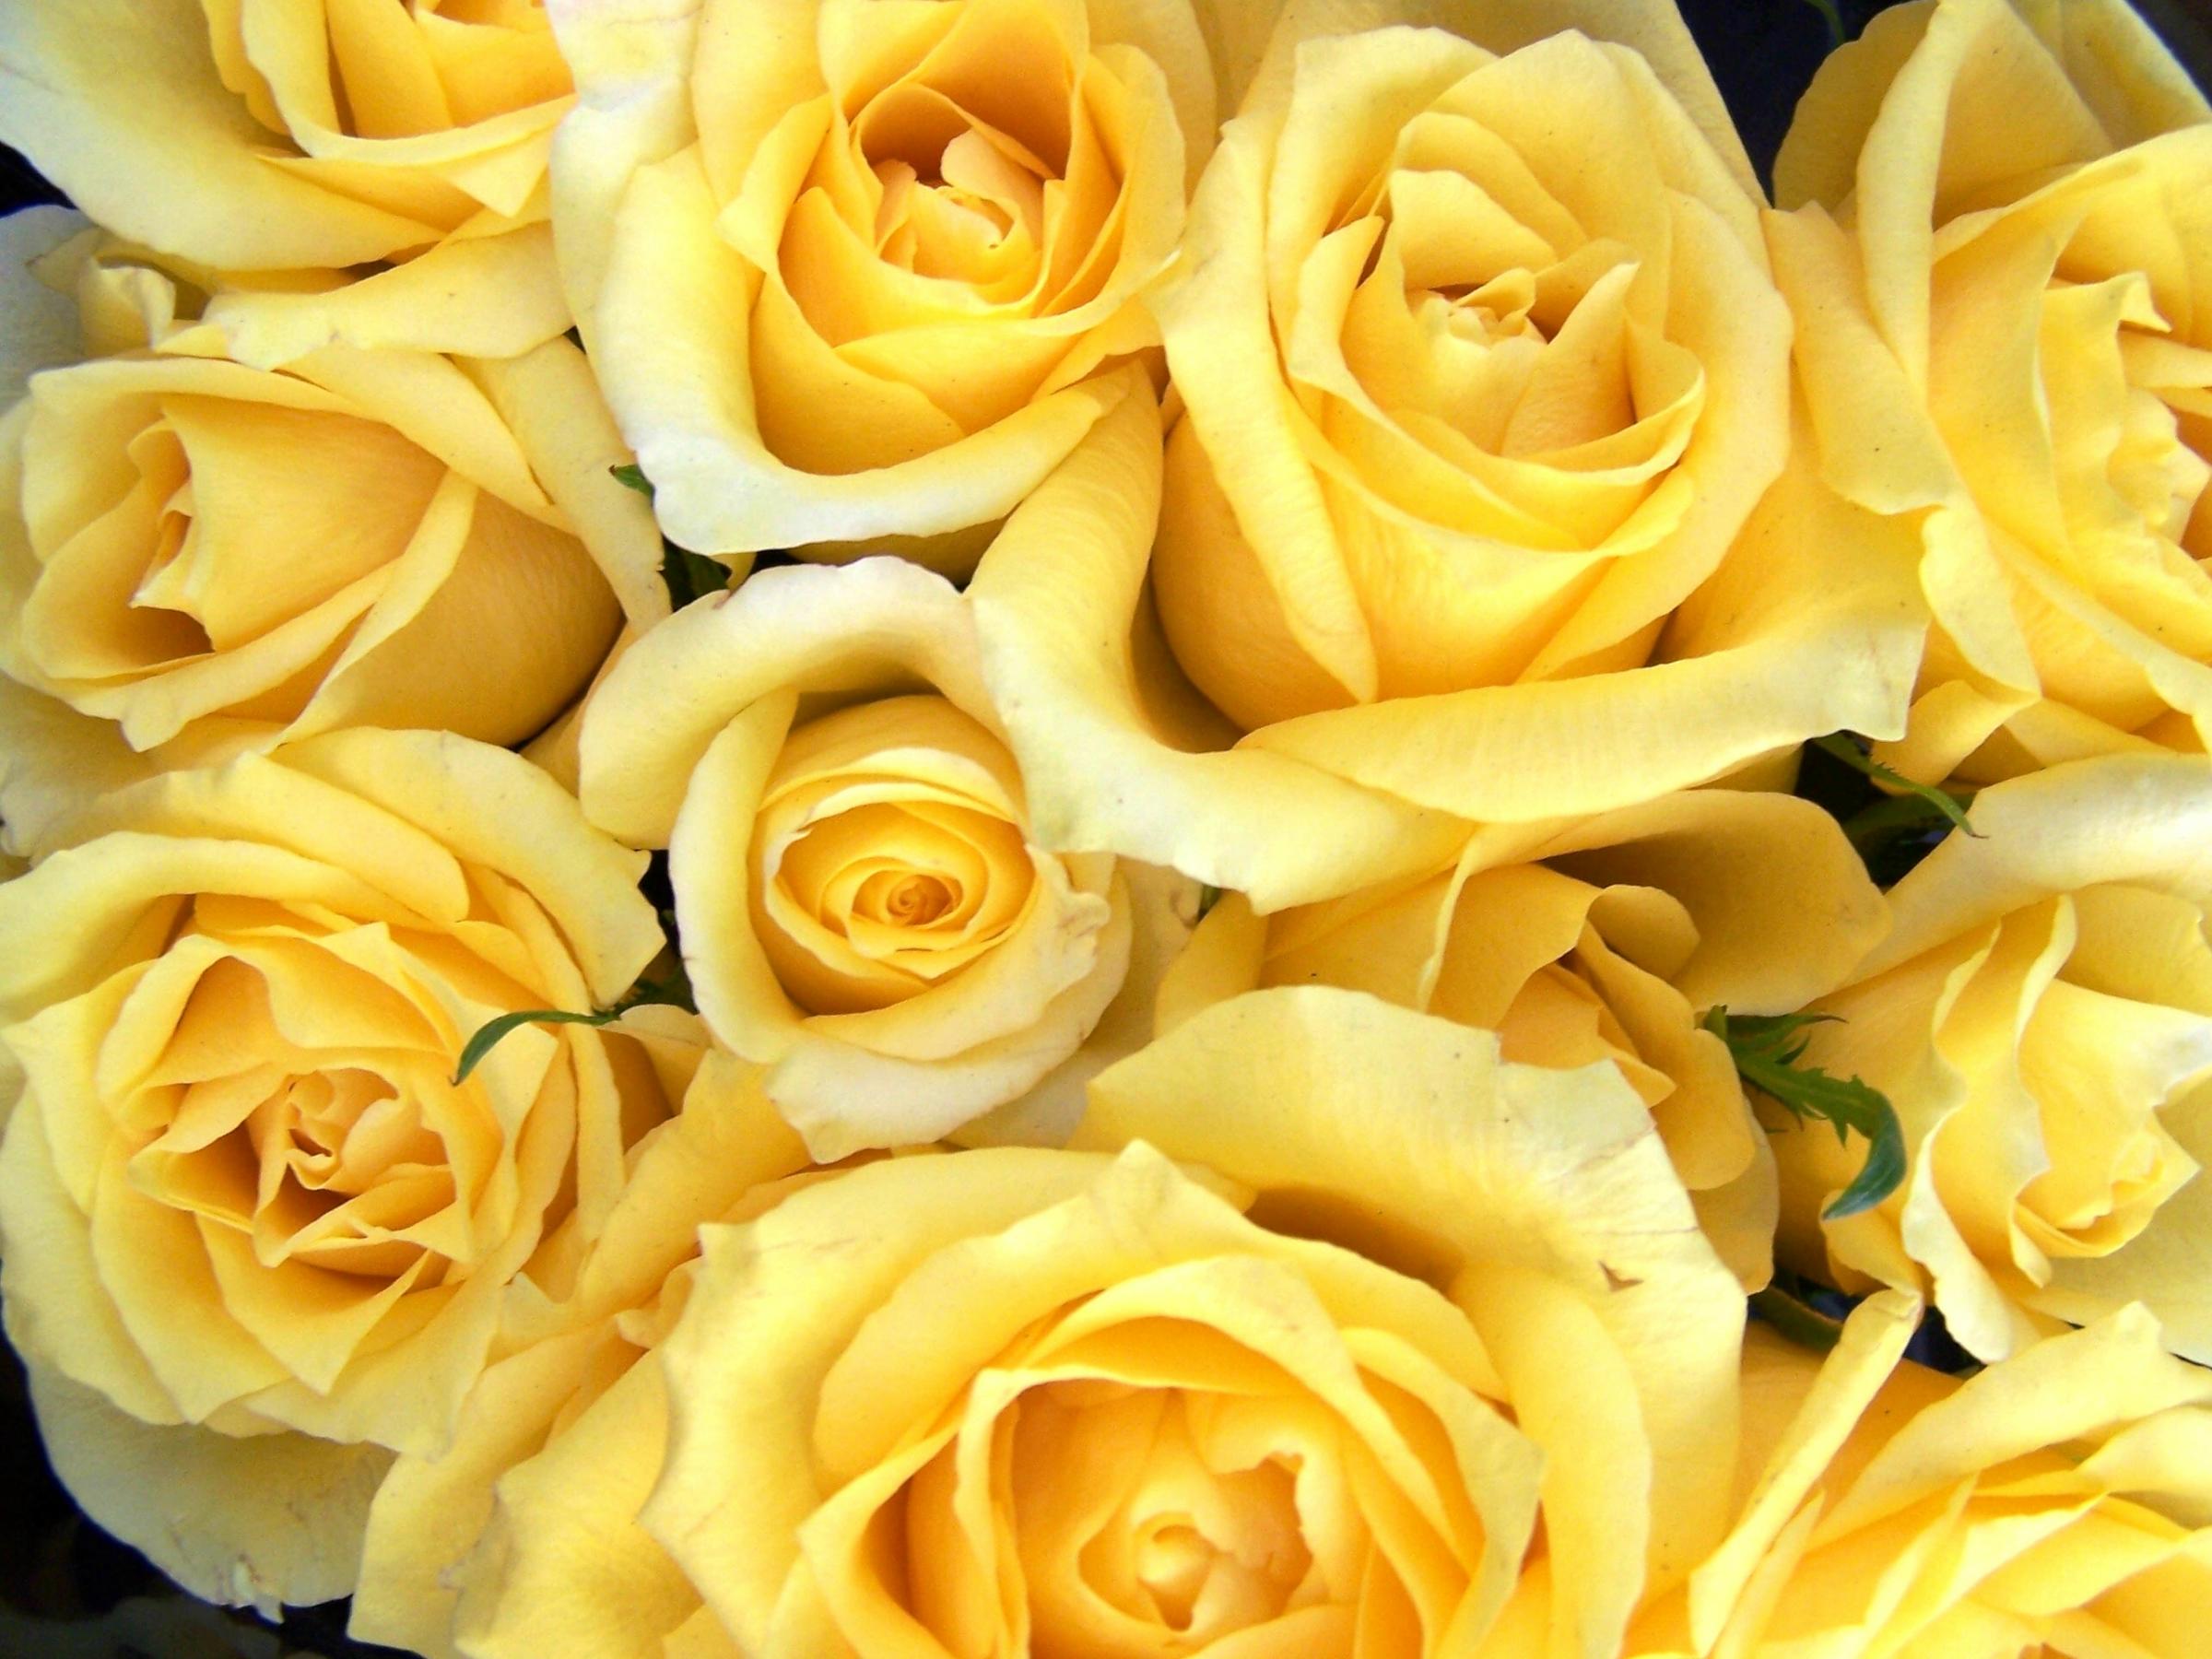 Yellow roses symbolize friendship. This image showcases beautiful yellow roses, perfect for a desktop wallpaper.